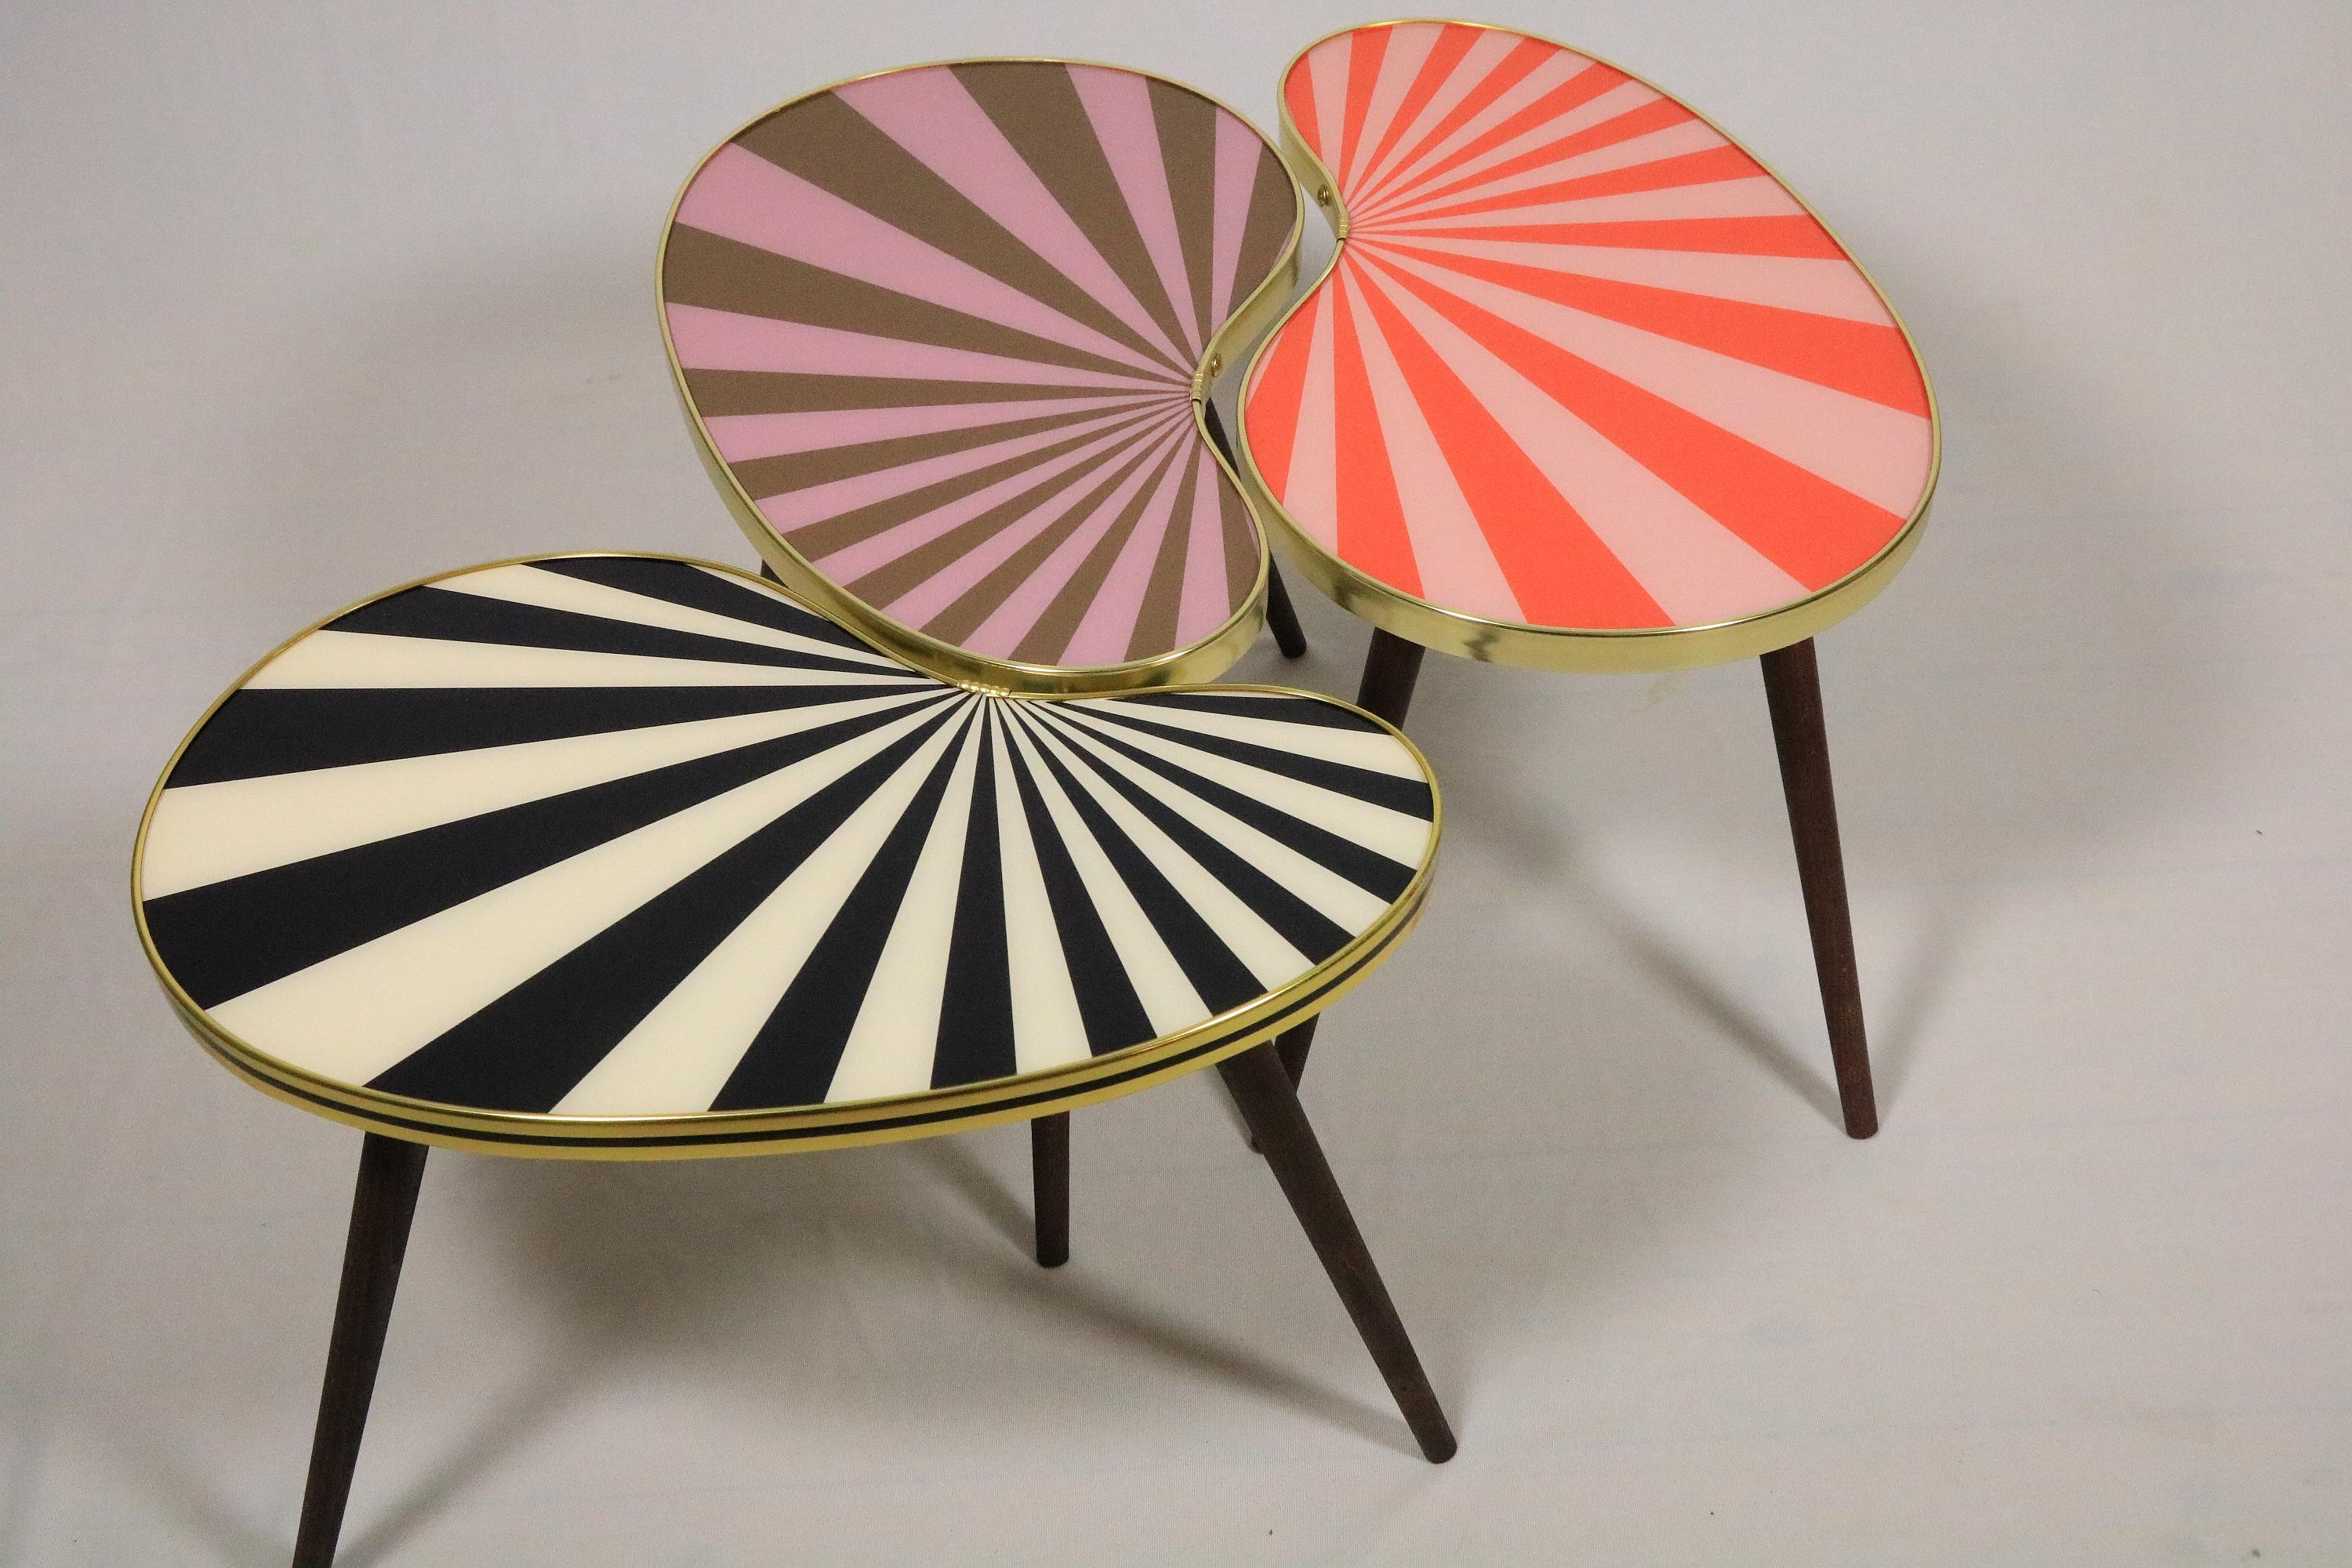 Small Side Table, Kidney Shaped, Pink-Taupe Stripes, 3 Elegant Legs, 50s Style For Sale 2